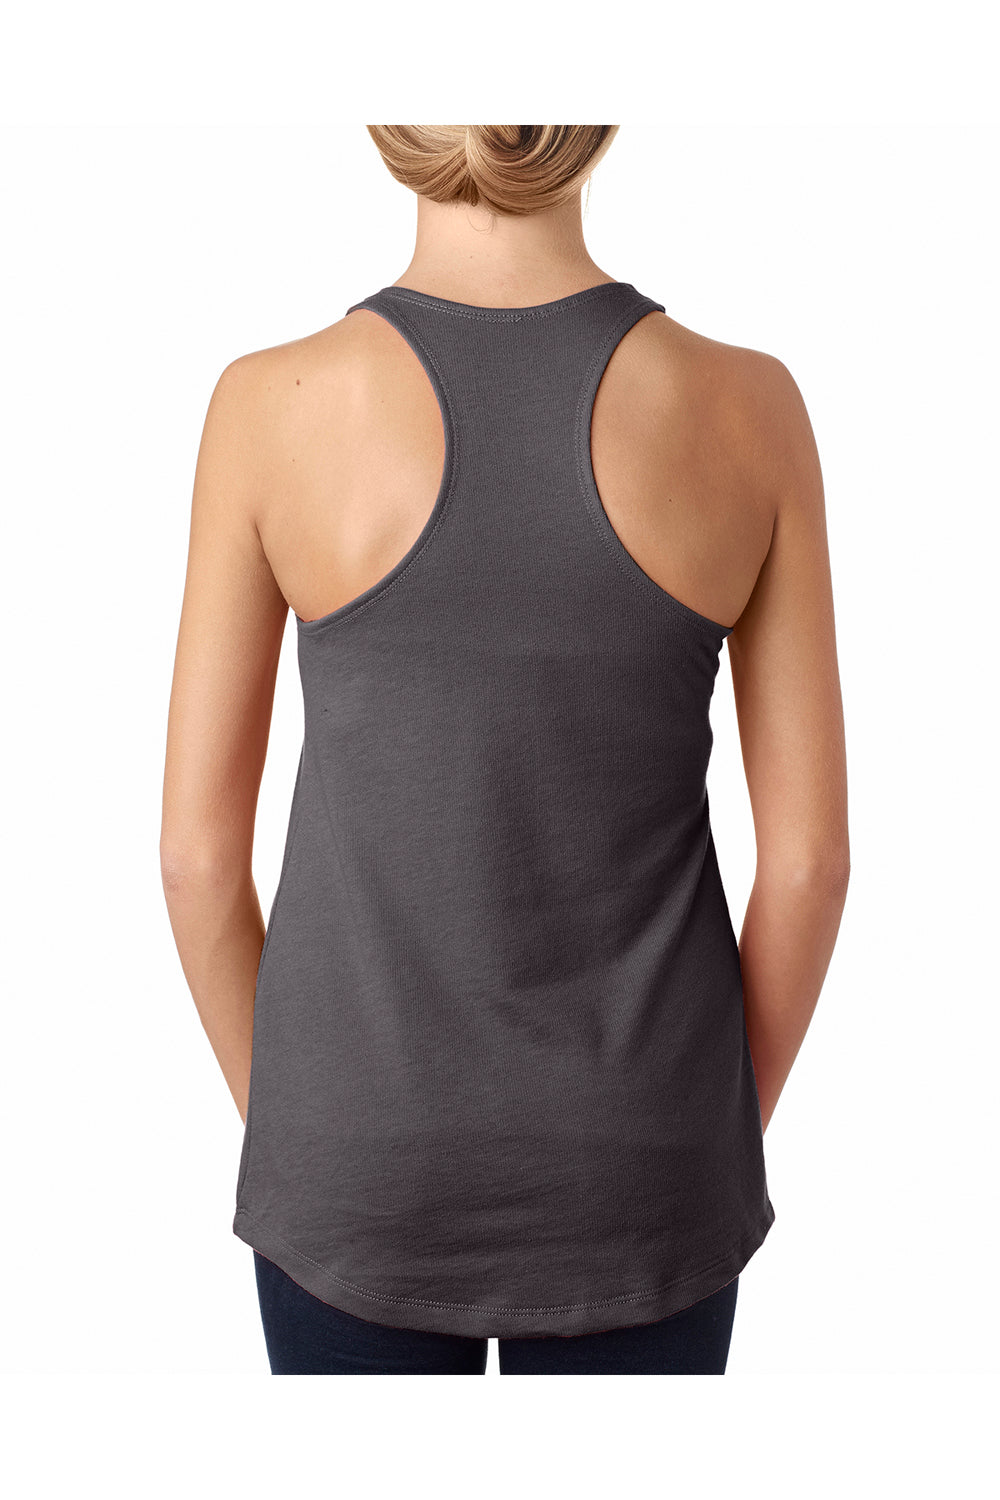 Next Level 6933 Womens French Terry Tank Top Dark Grey Back